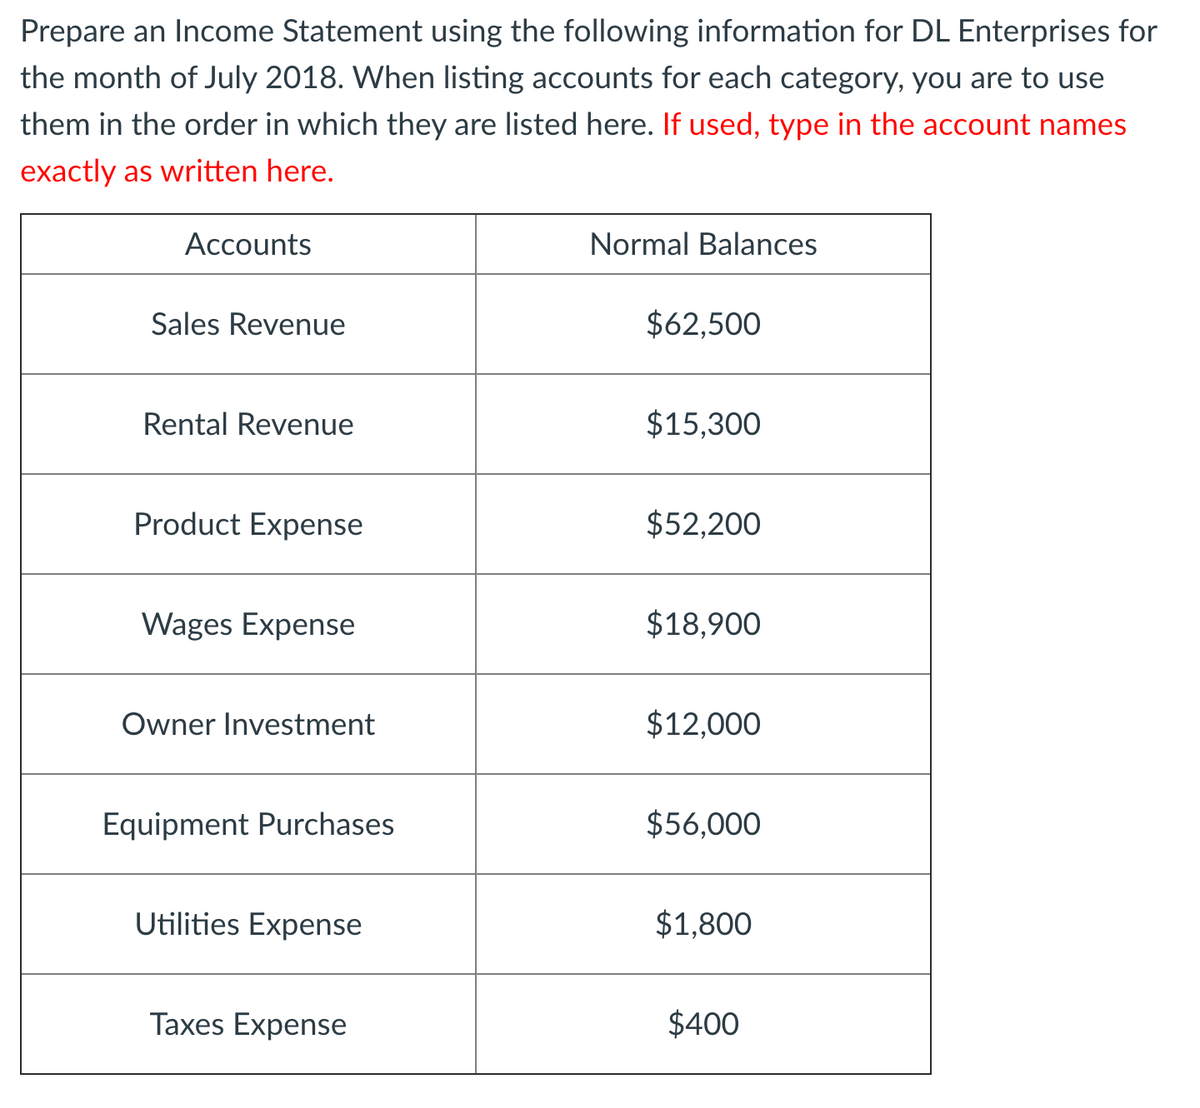 Prepare an Income Statement using the following information for DL Enterprises for
the month of July 2018. When listing accounts for each category, you are to use
them in the order in which they are listed here. If used, type in the account names
exactly as written here.
Accounts
Normal Balances
Sales Revenue
$62,500
Rental Revenue
$15,300
Product Expense
$52,200
Wages Expense
$18,900
Owner Investment
$12,000
Equipment Purchases
$56,000
Utilities Expense
$1,800
Taxes Expense
$400
